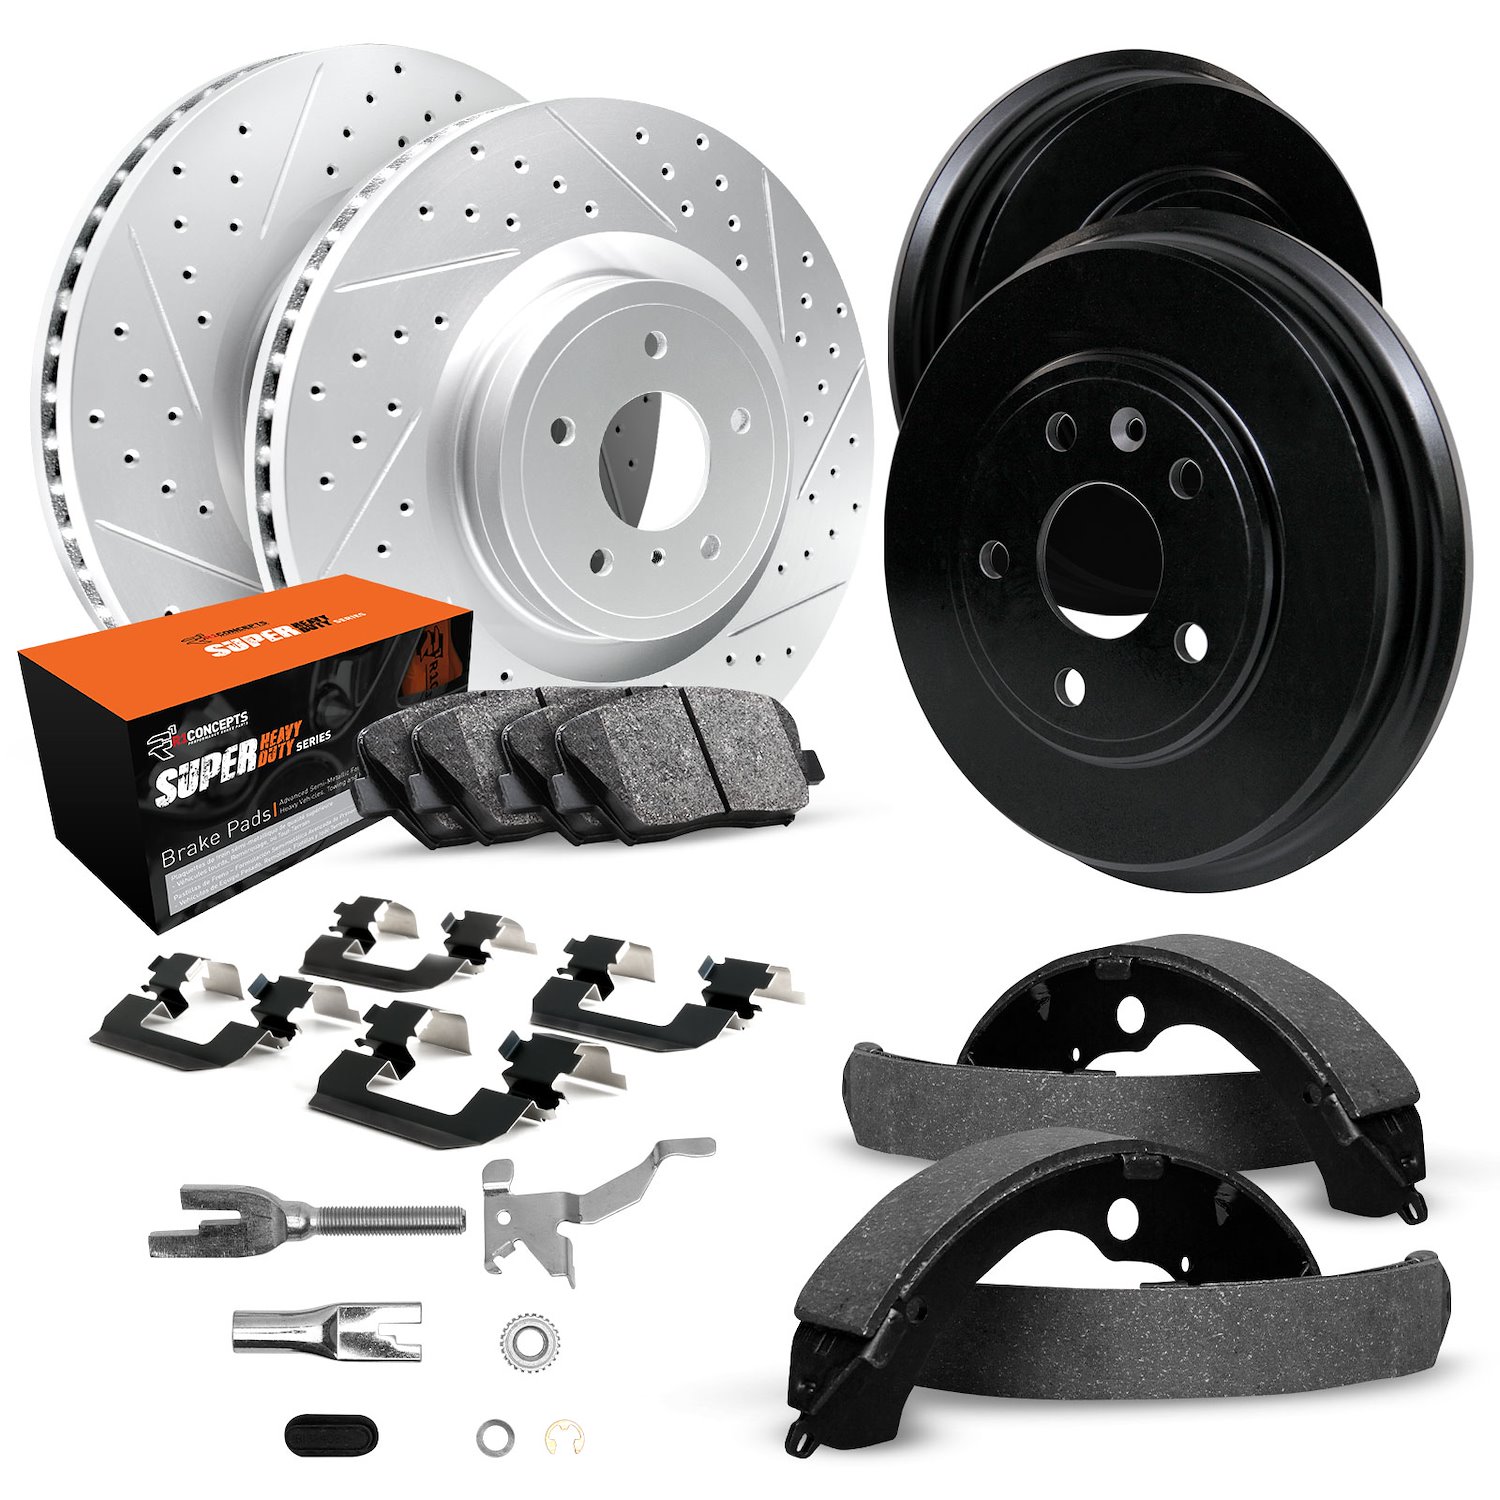 GEO-Carbon Drilled/Slotted Rotors/Drums w/Super-Duty Pads/Shoes/Hardware/Adjusters, 1971-1975 GM, Position: Front/Rear